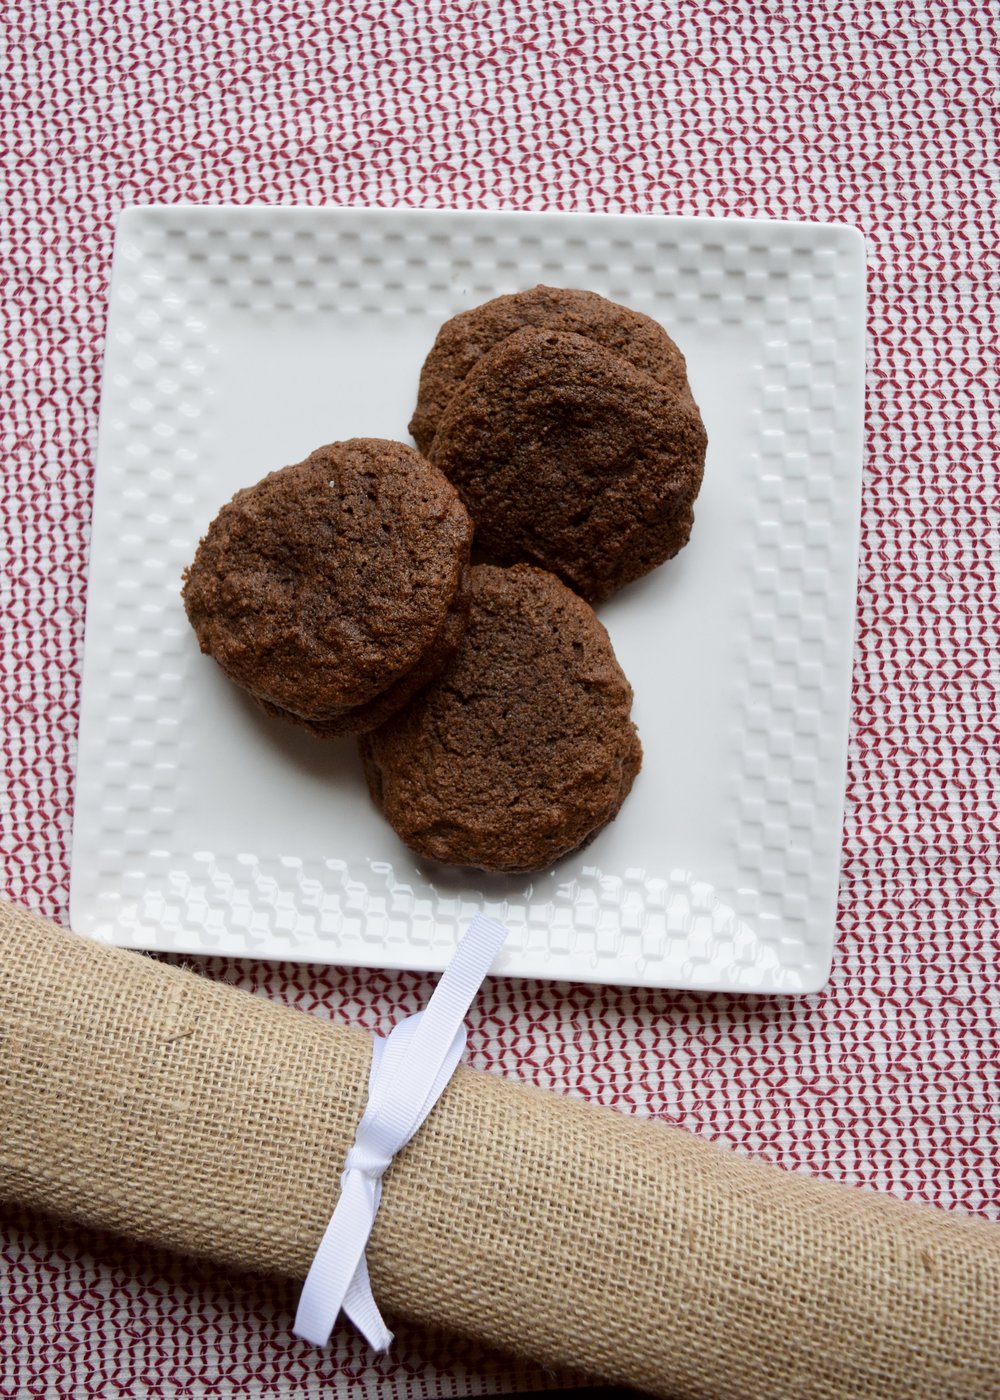  spice cookies, paleo, primal, Christmas, holiday, 